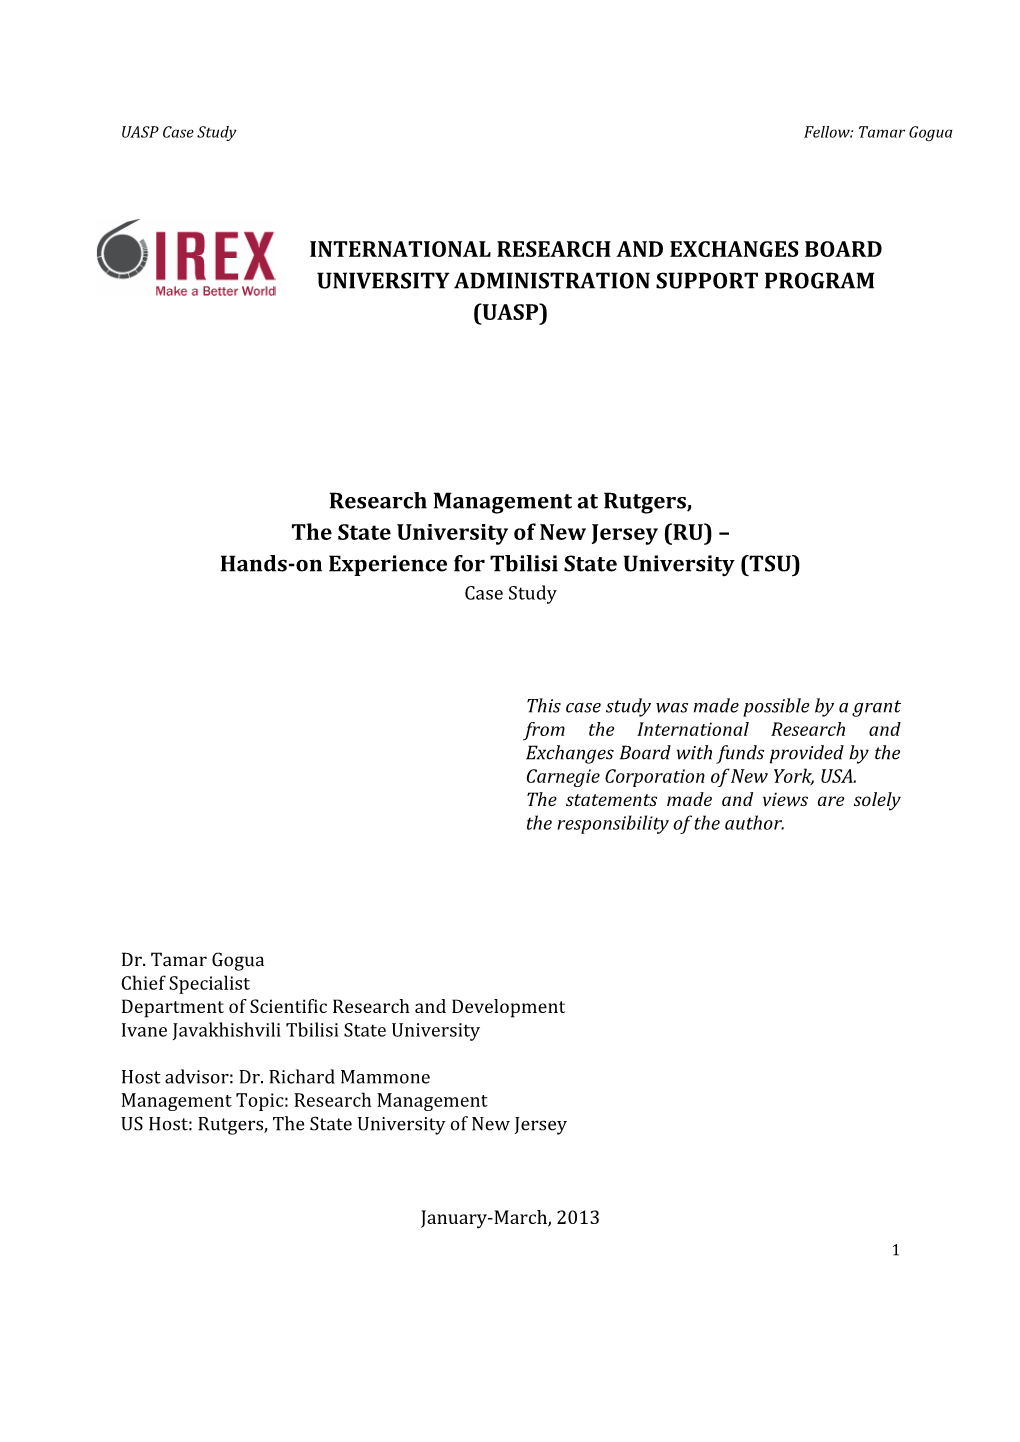 INTERNATIONAL RESEARCH and EXCHANGES BOARD UNIVERSITY ADMINISTRATION SUPPORT PROGRAM (UASP) Research Management at Rutgers